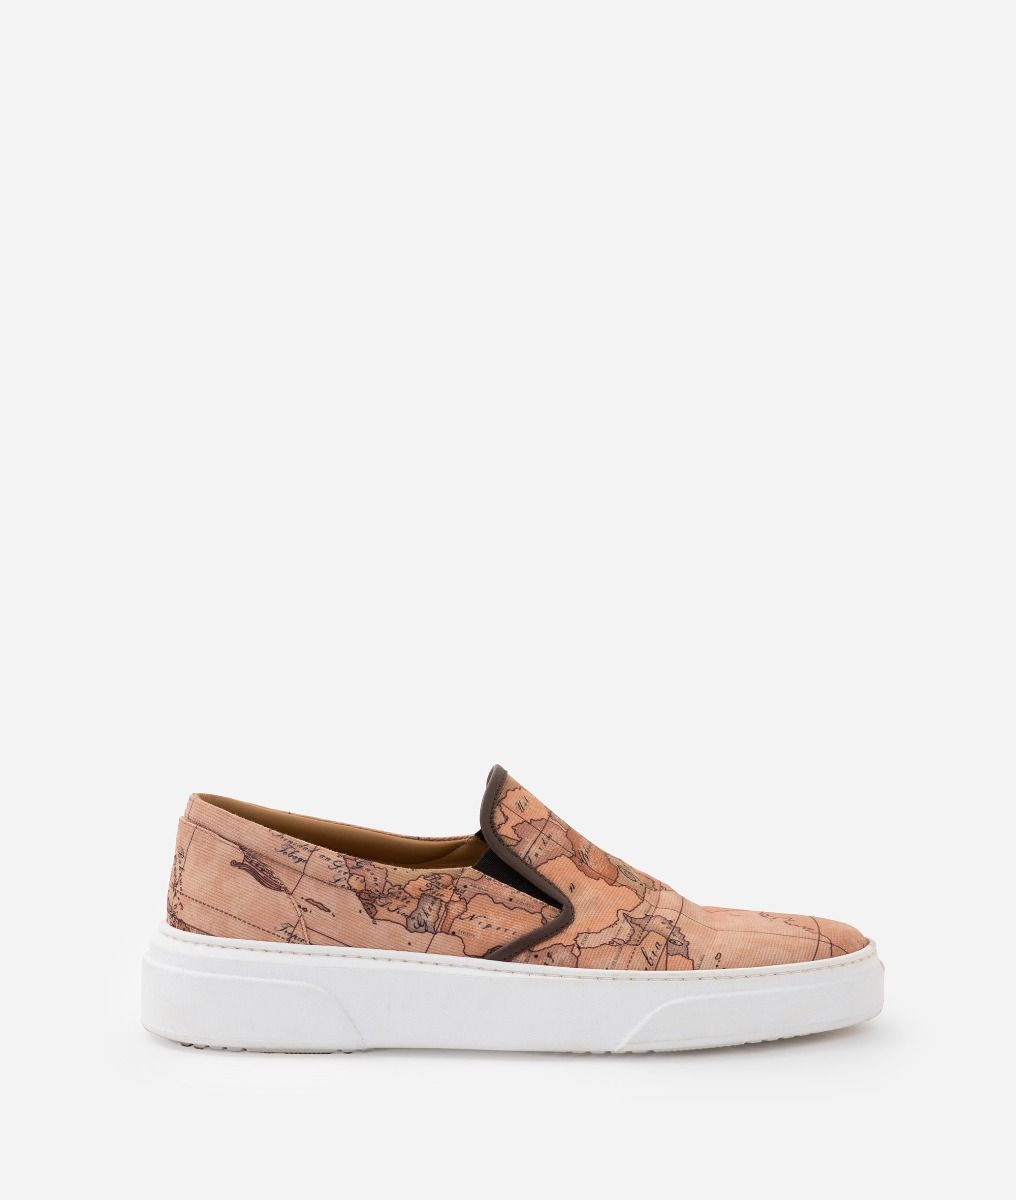 Canvas slip-on sneakers with Geo Classic print
,front